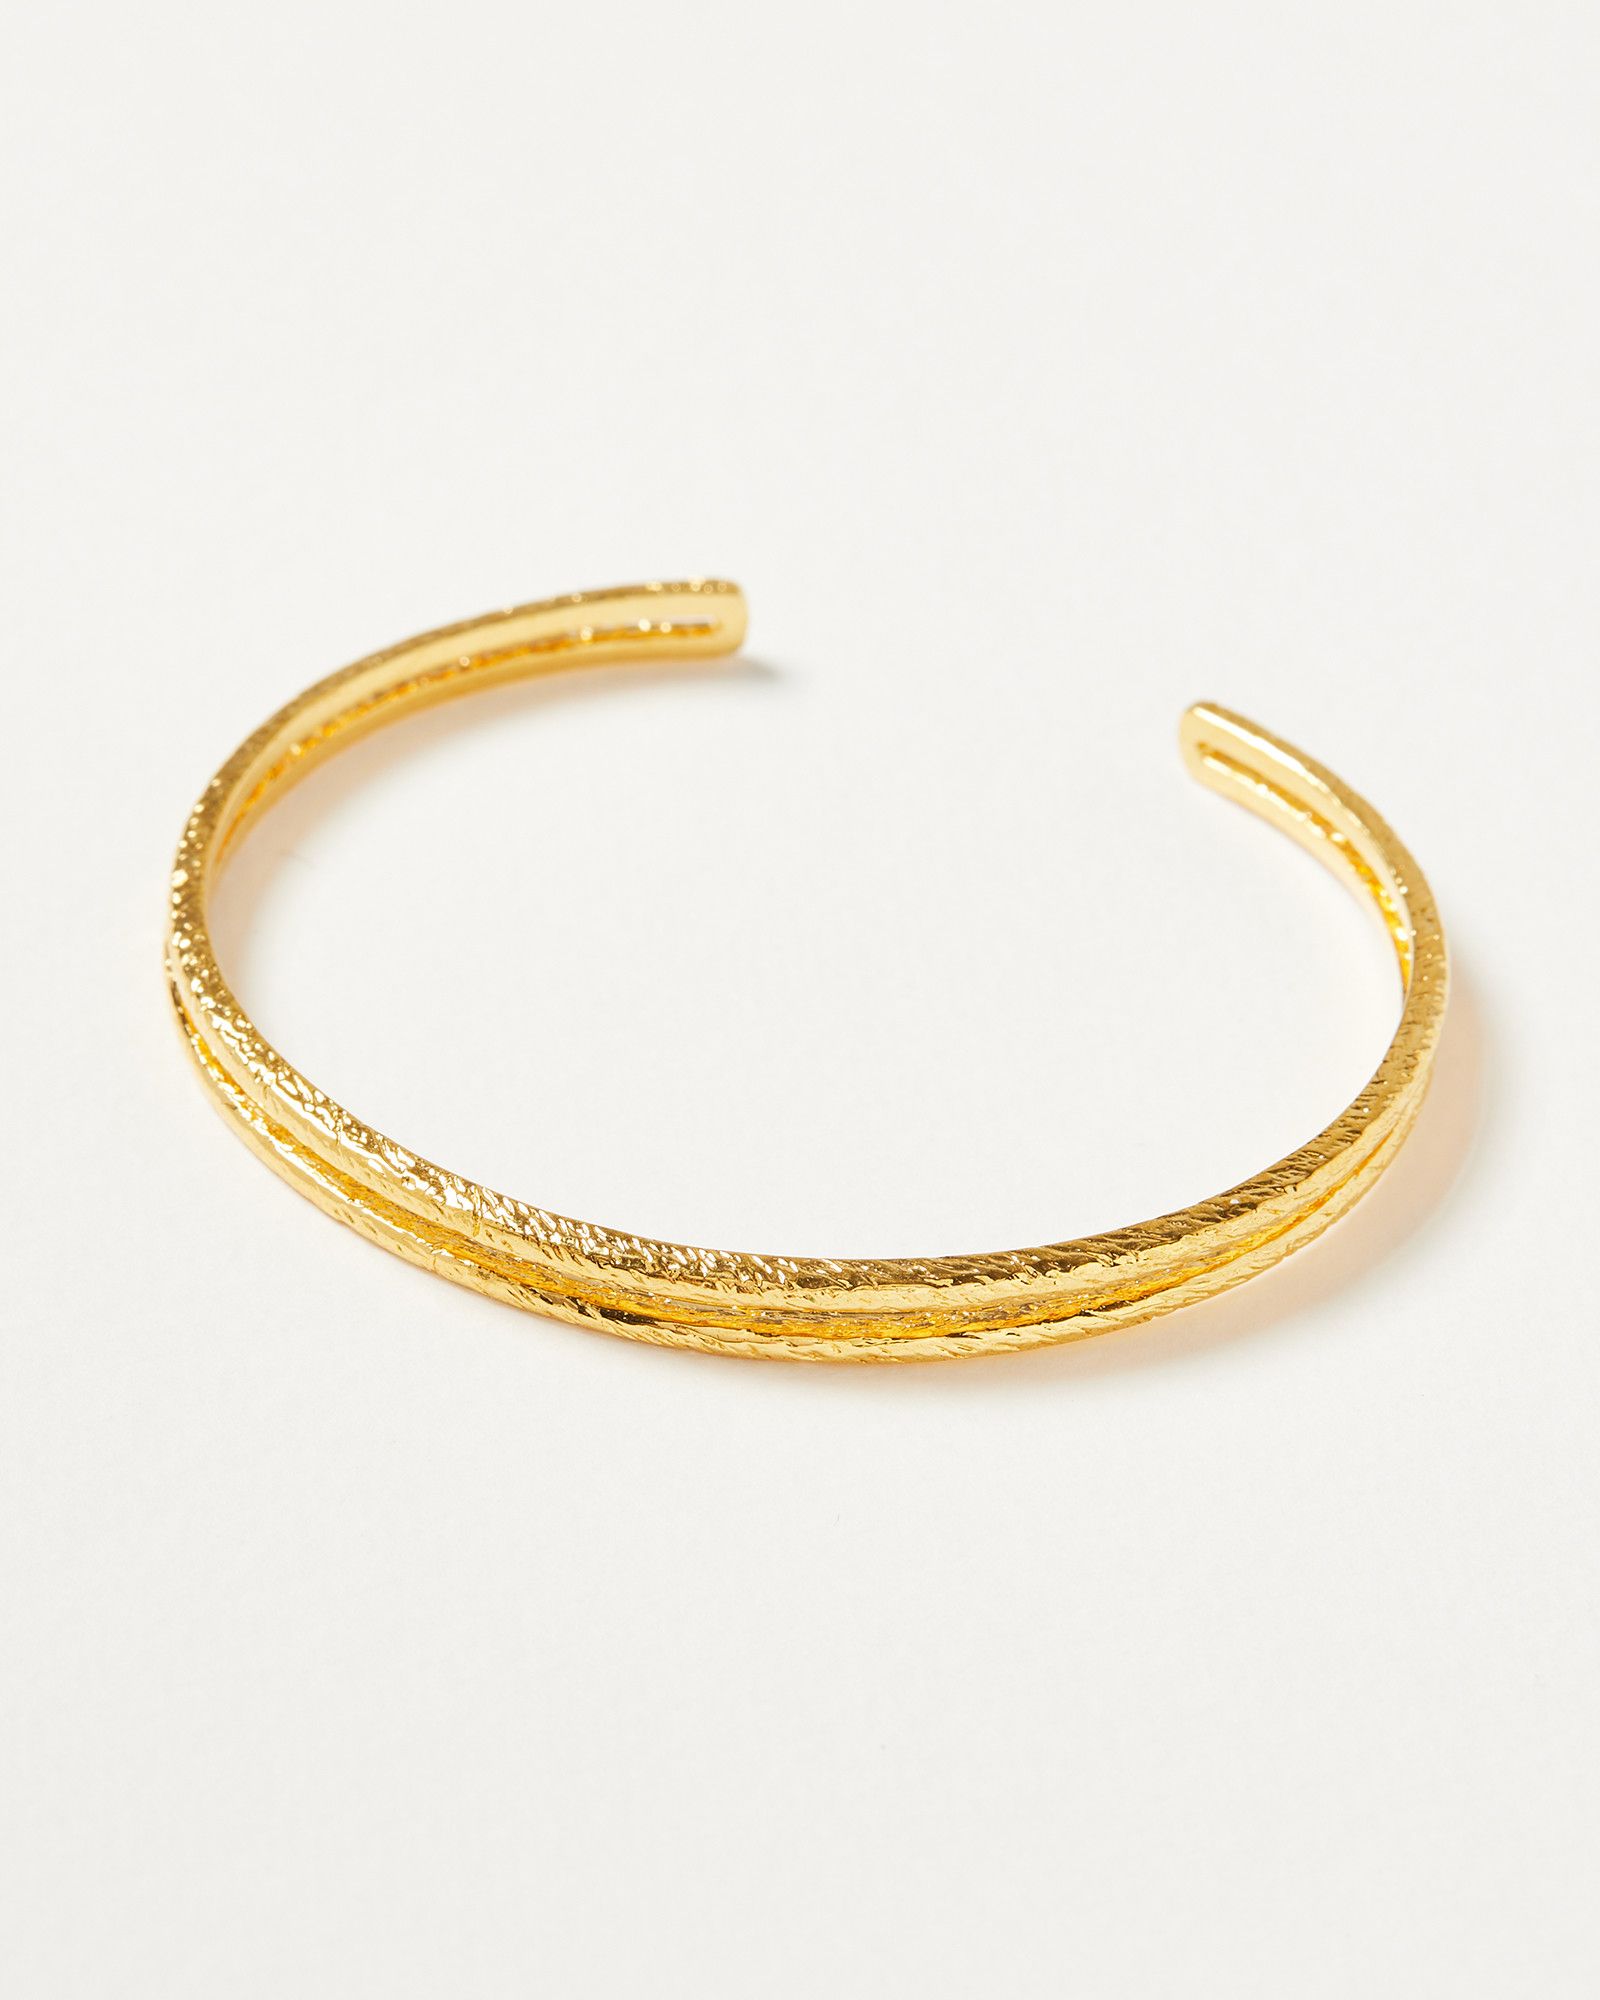 Comino Textured Lines Gold Plated Cuff Bangle | Oliver Bonas